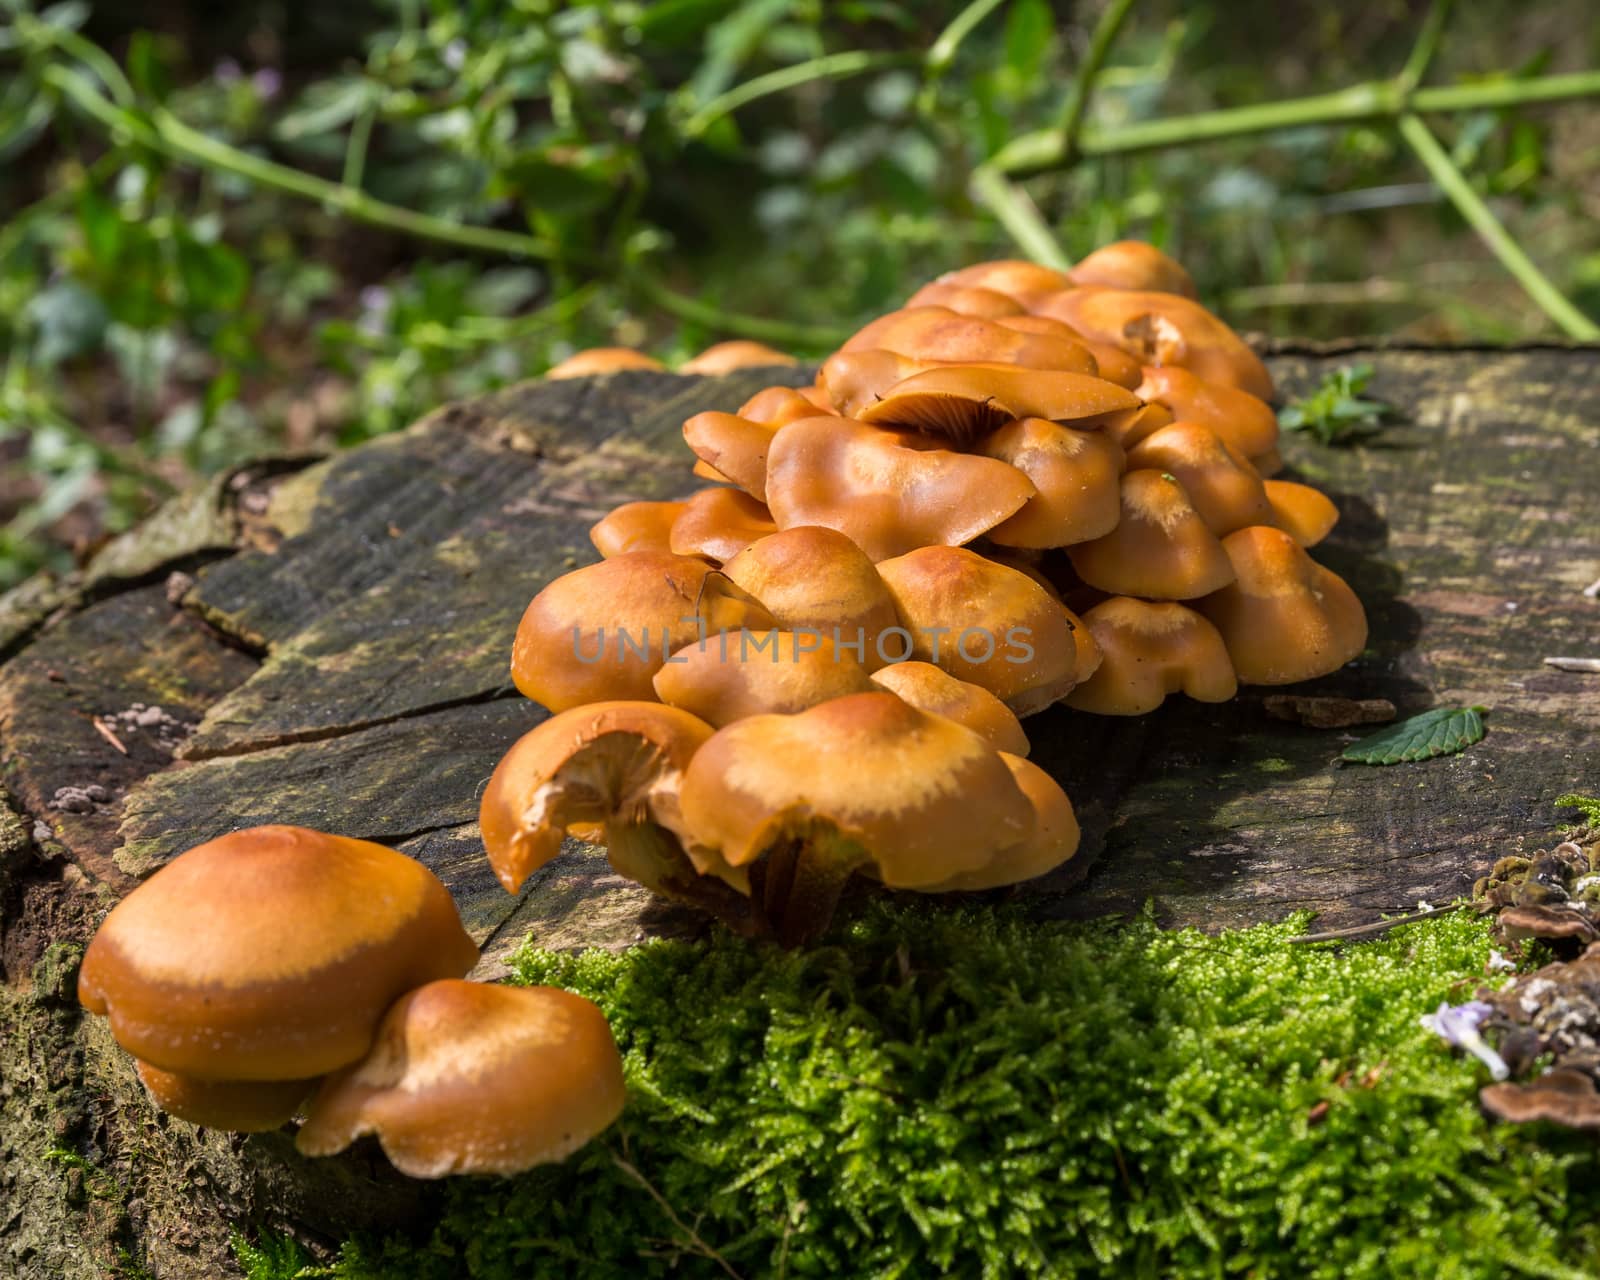 Overview of a group of brown forest mushrooms